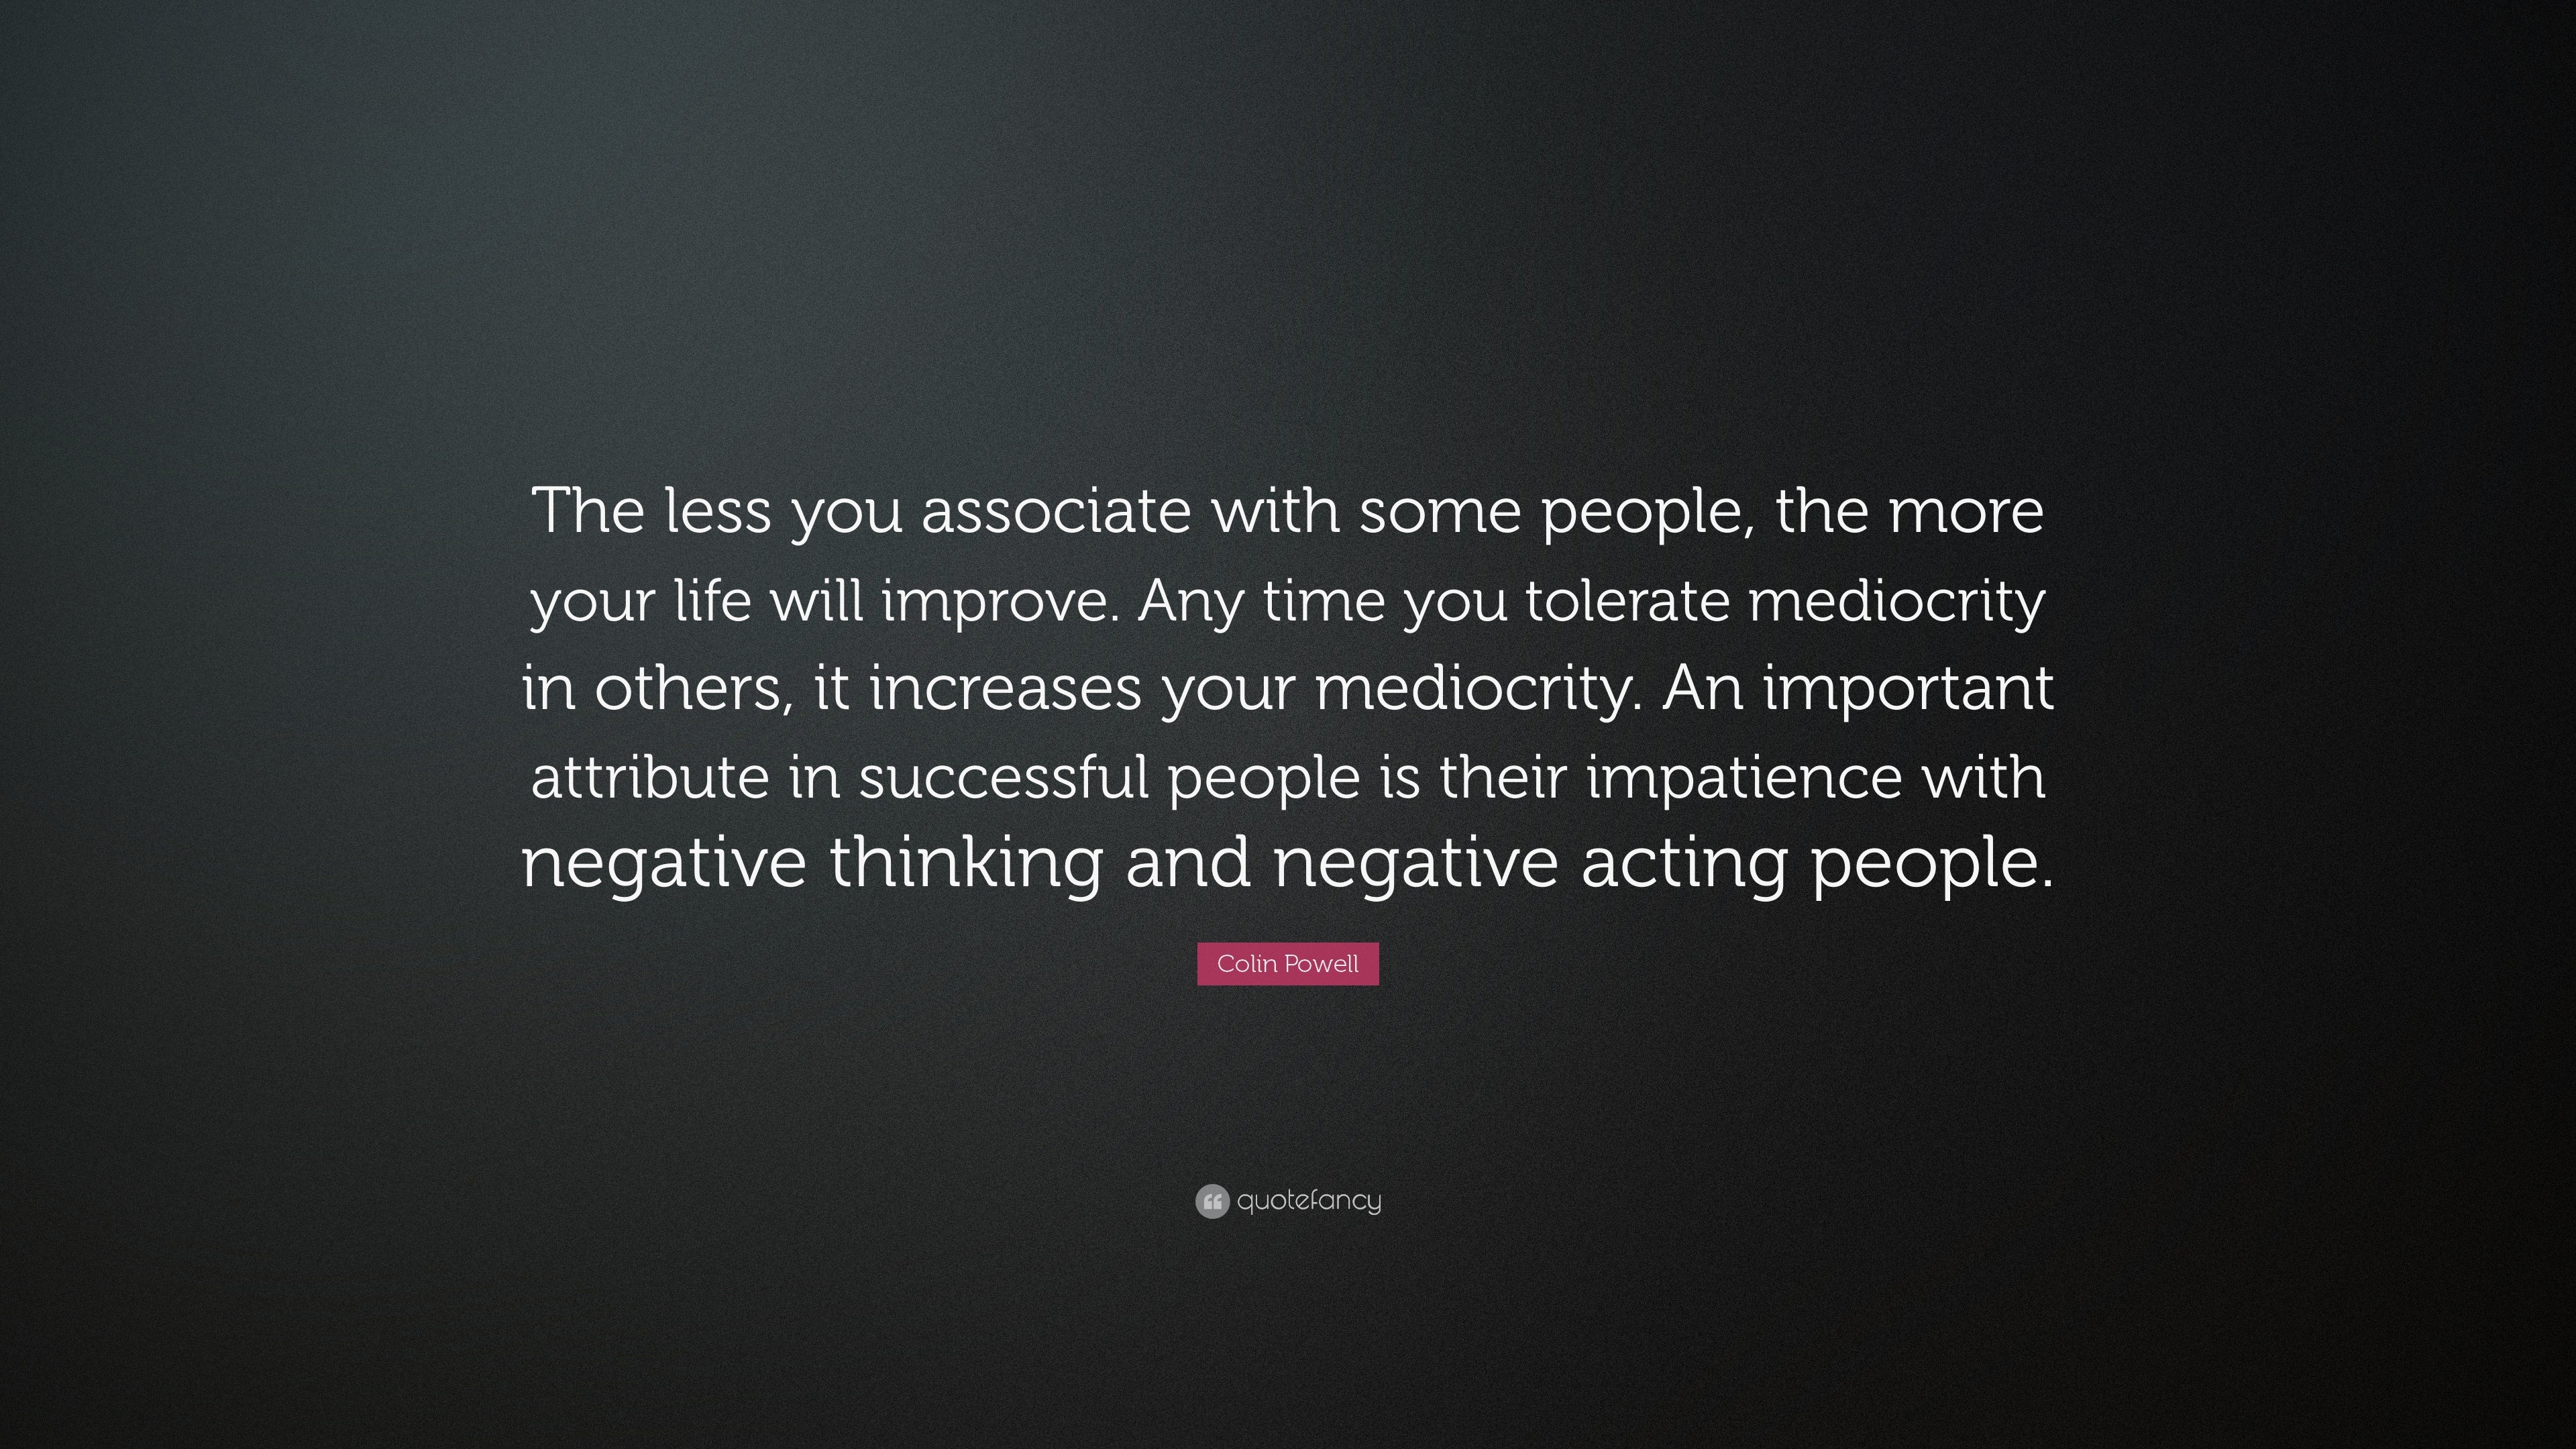 Colin Powell Quote: “The less you associate with some people, the more ...